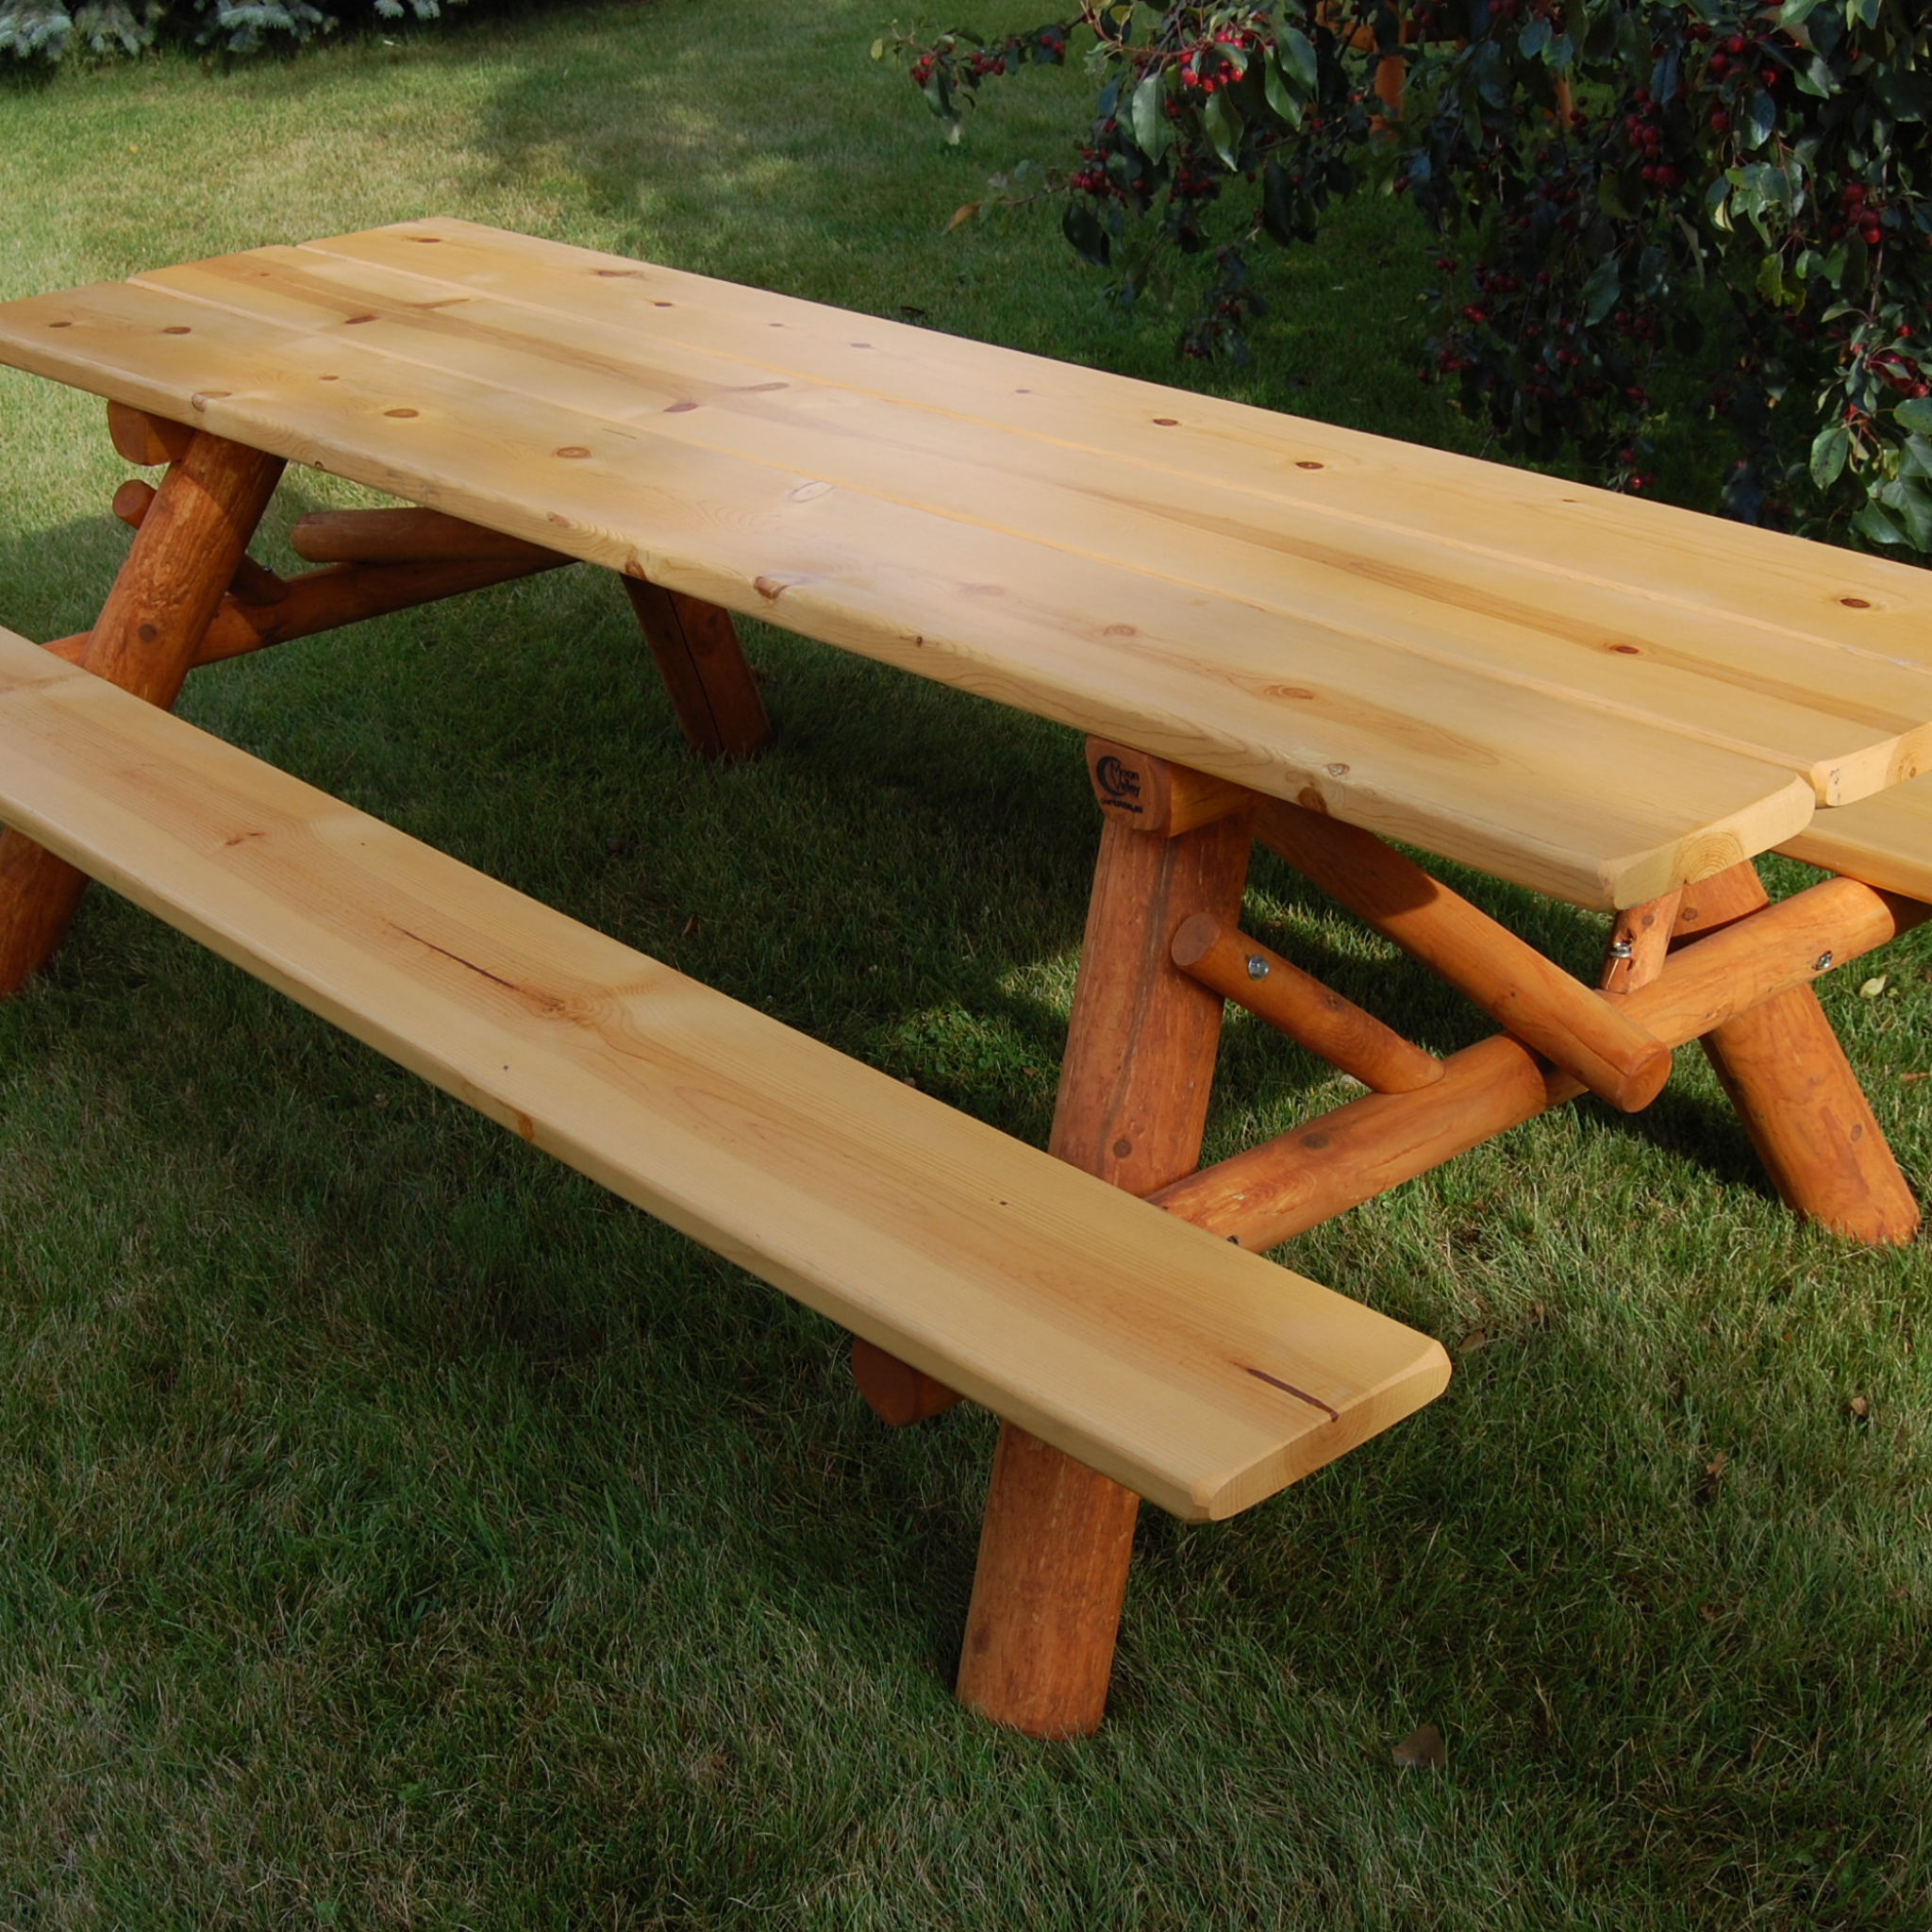 Moon Valley Rustic Cedar Log 8-Foot Picnic Table with Attached Benches